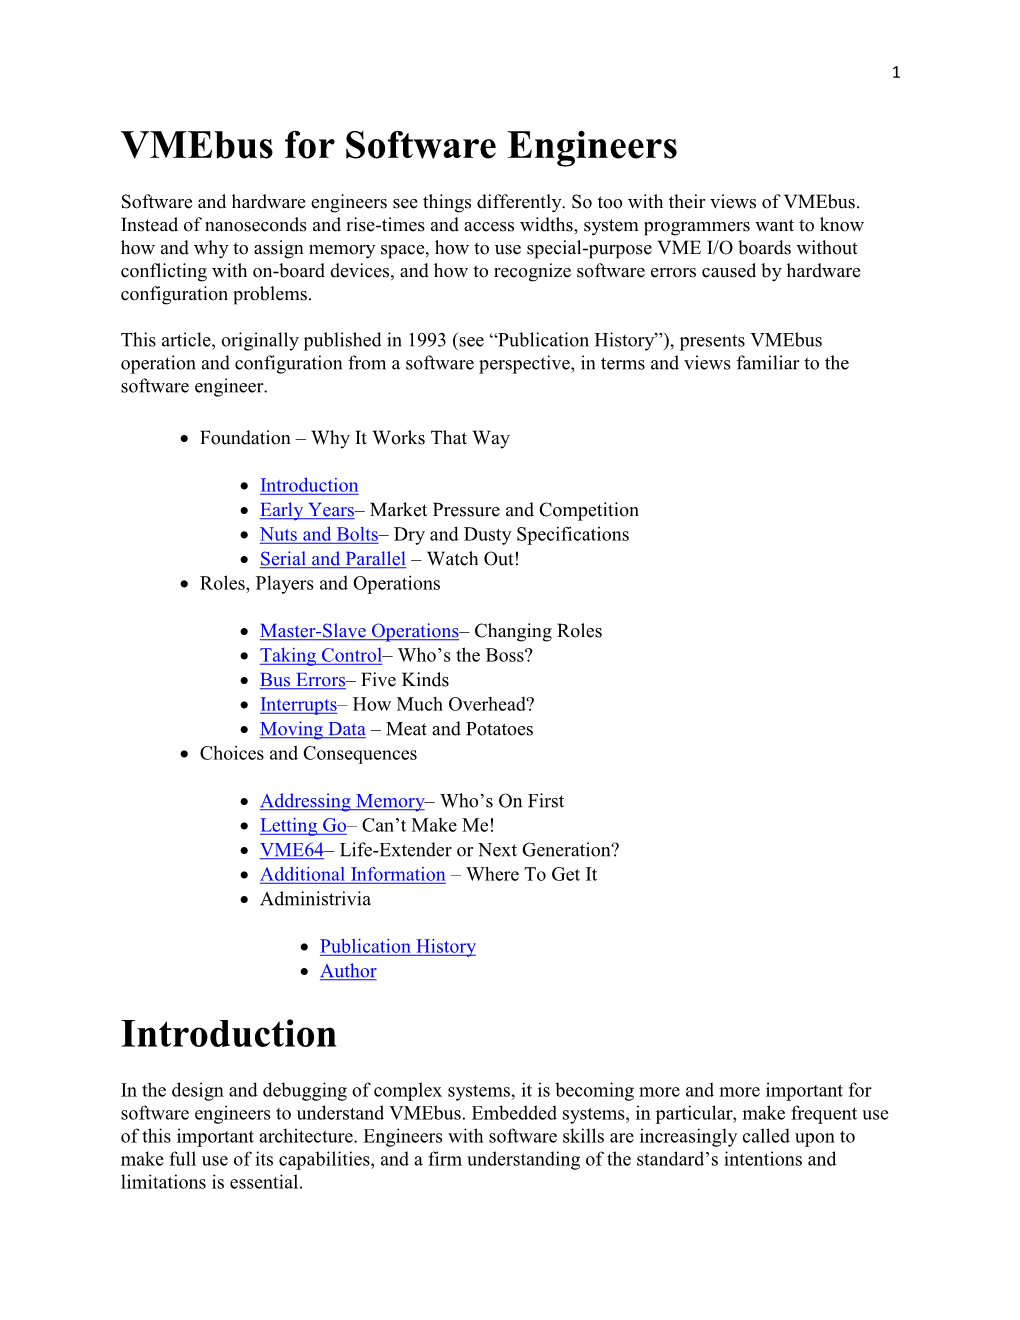 Vmebus for Software Engineers Introduction